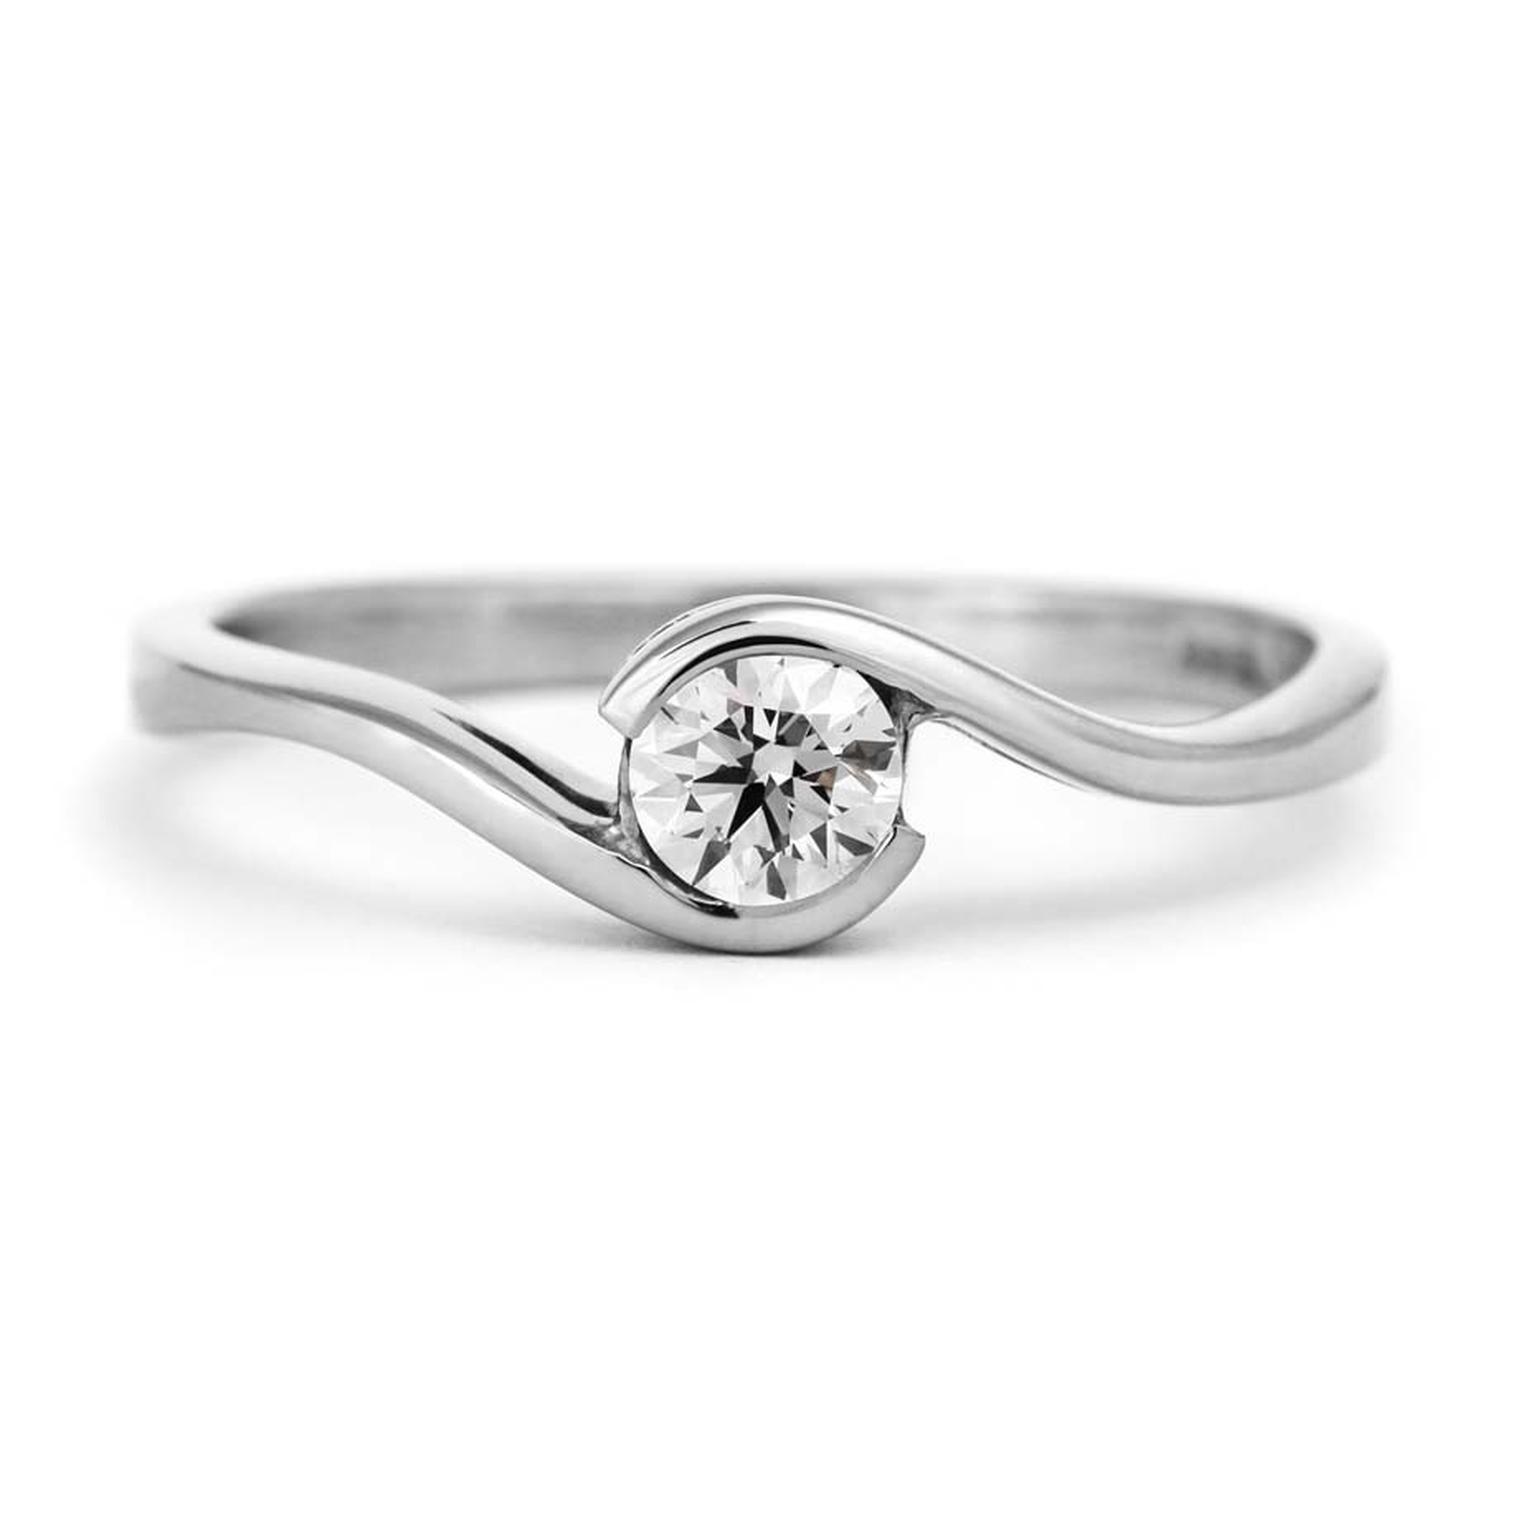 CRED brilliant wrap engagement ring in white gold, available at Olive & Reg.